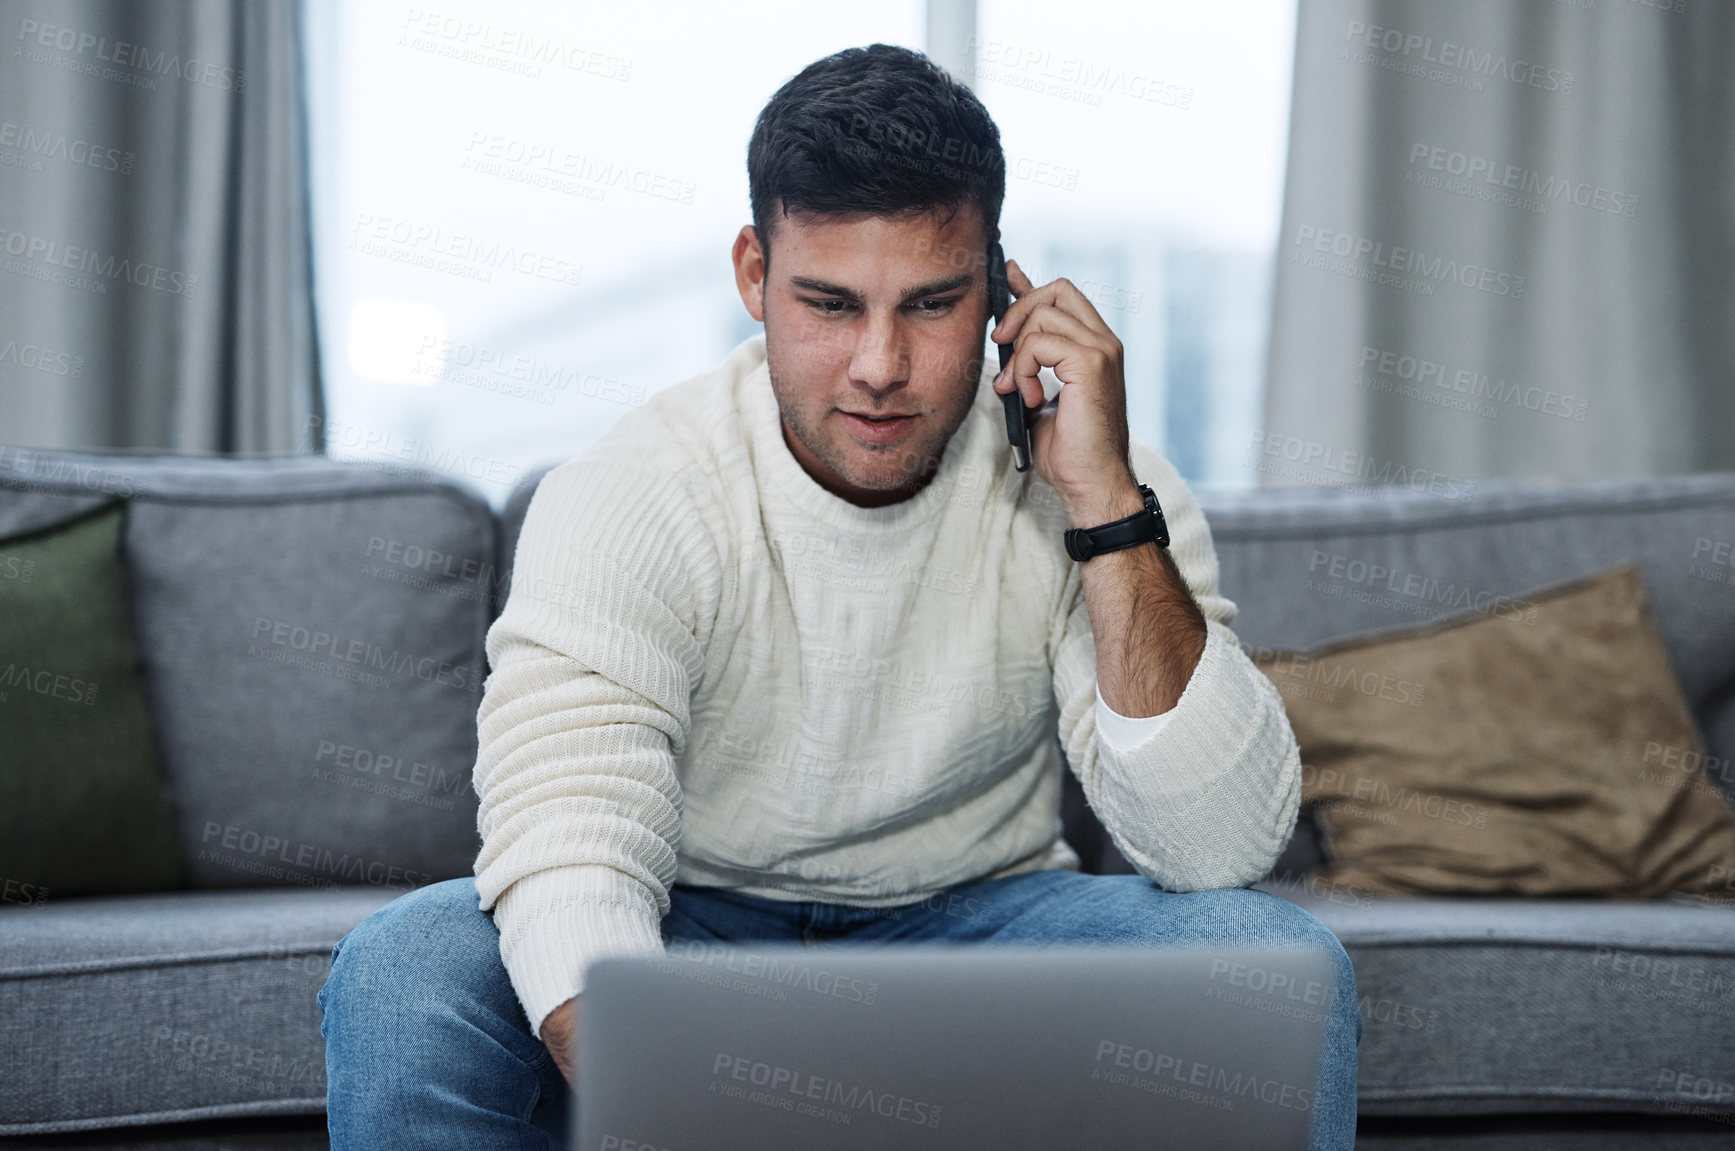 Buy stock photo Shot of a young man using a laptop and smartphone while working from home